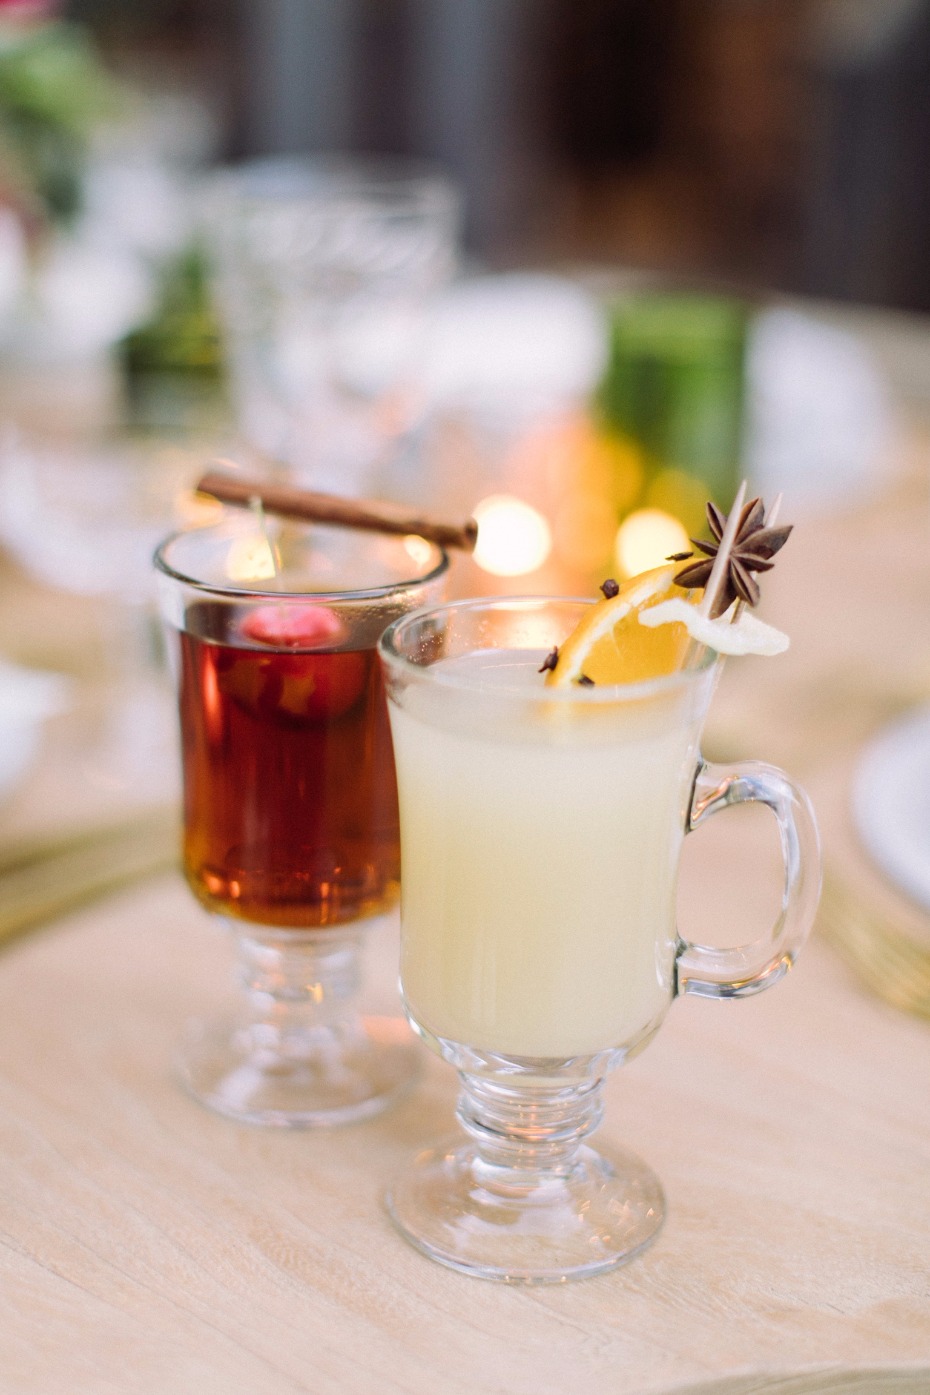 Mulled Cider Cocktails are Having a Total Moment